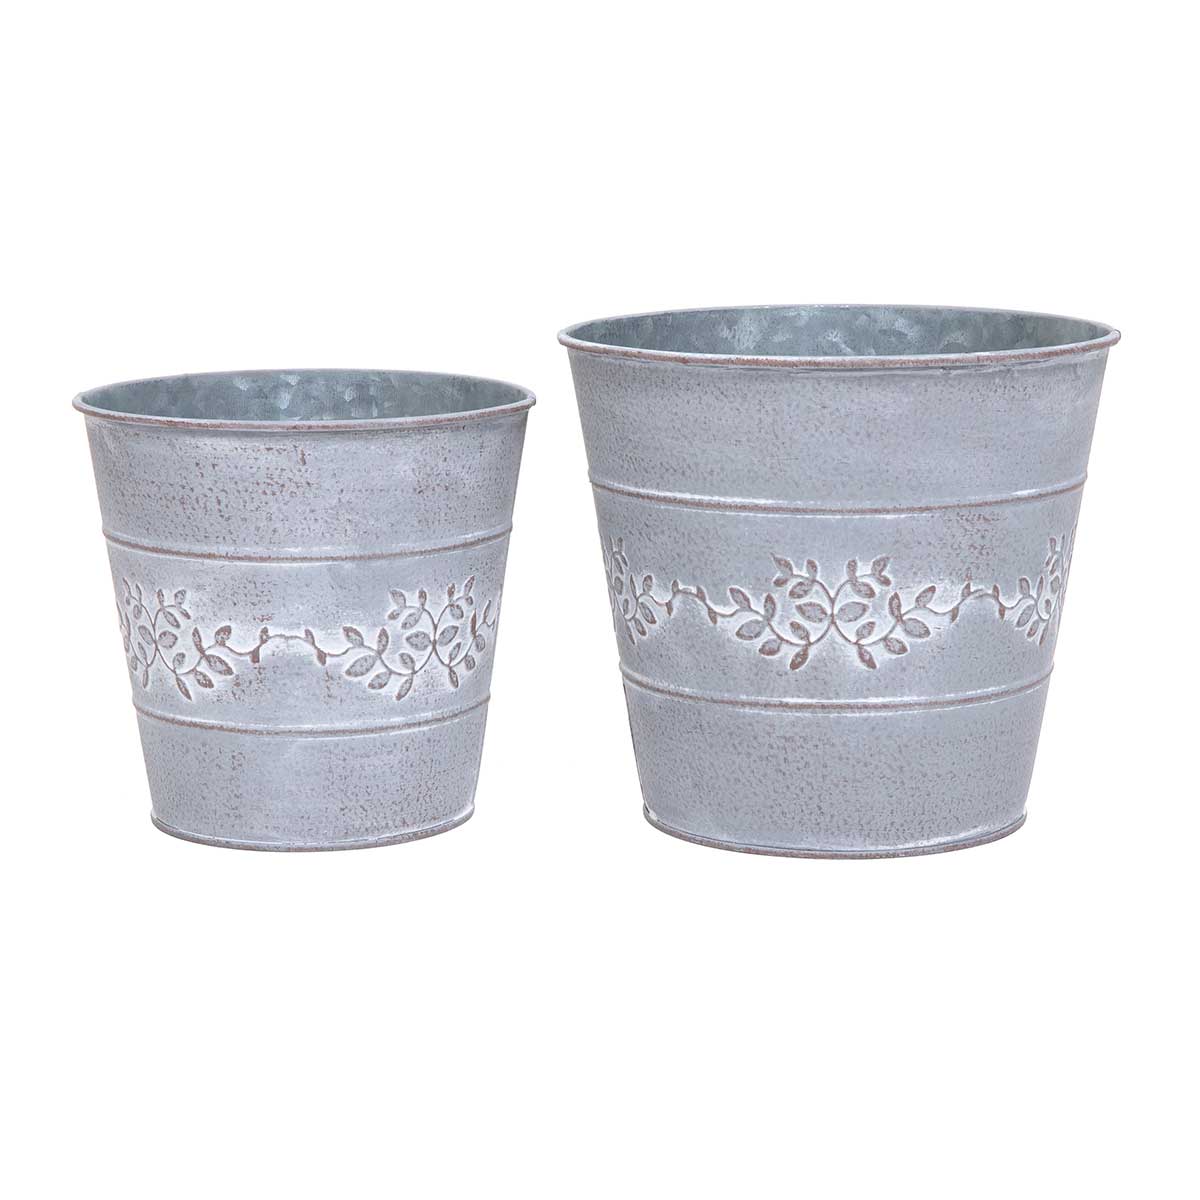 BUCKET PRIVET GREY SMALL 6IN X 5.5IN METAL - Click Image to Close